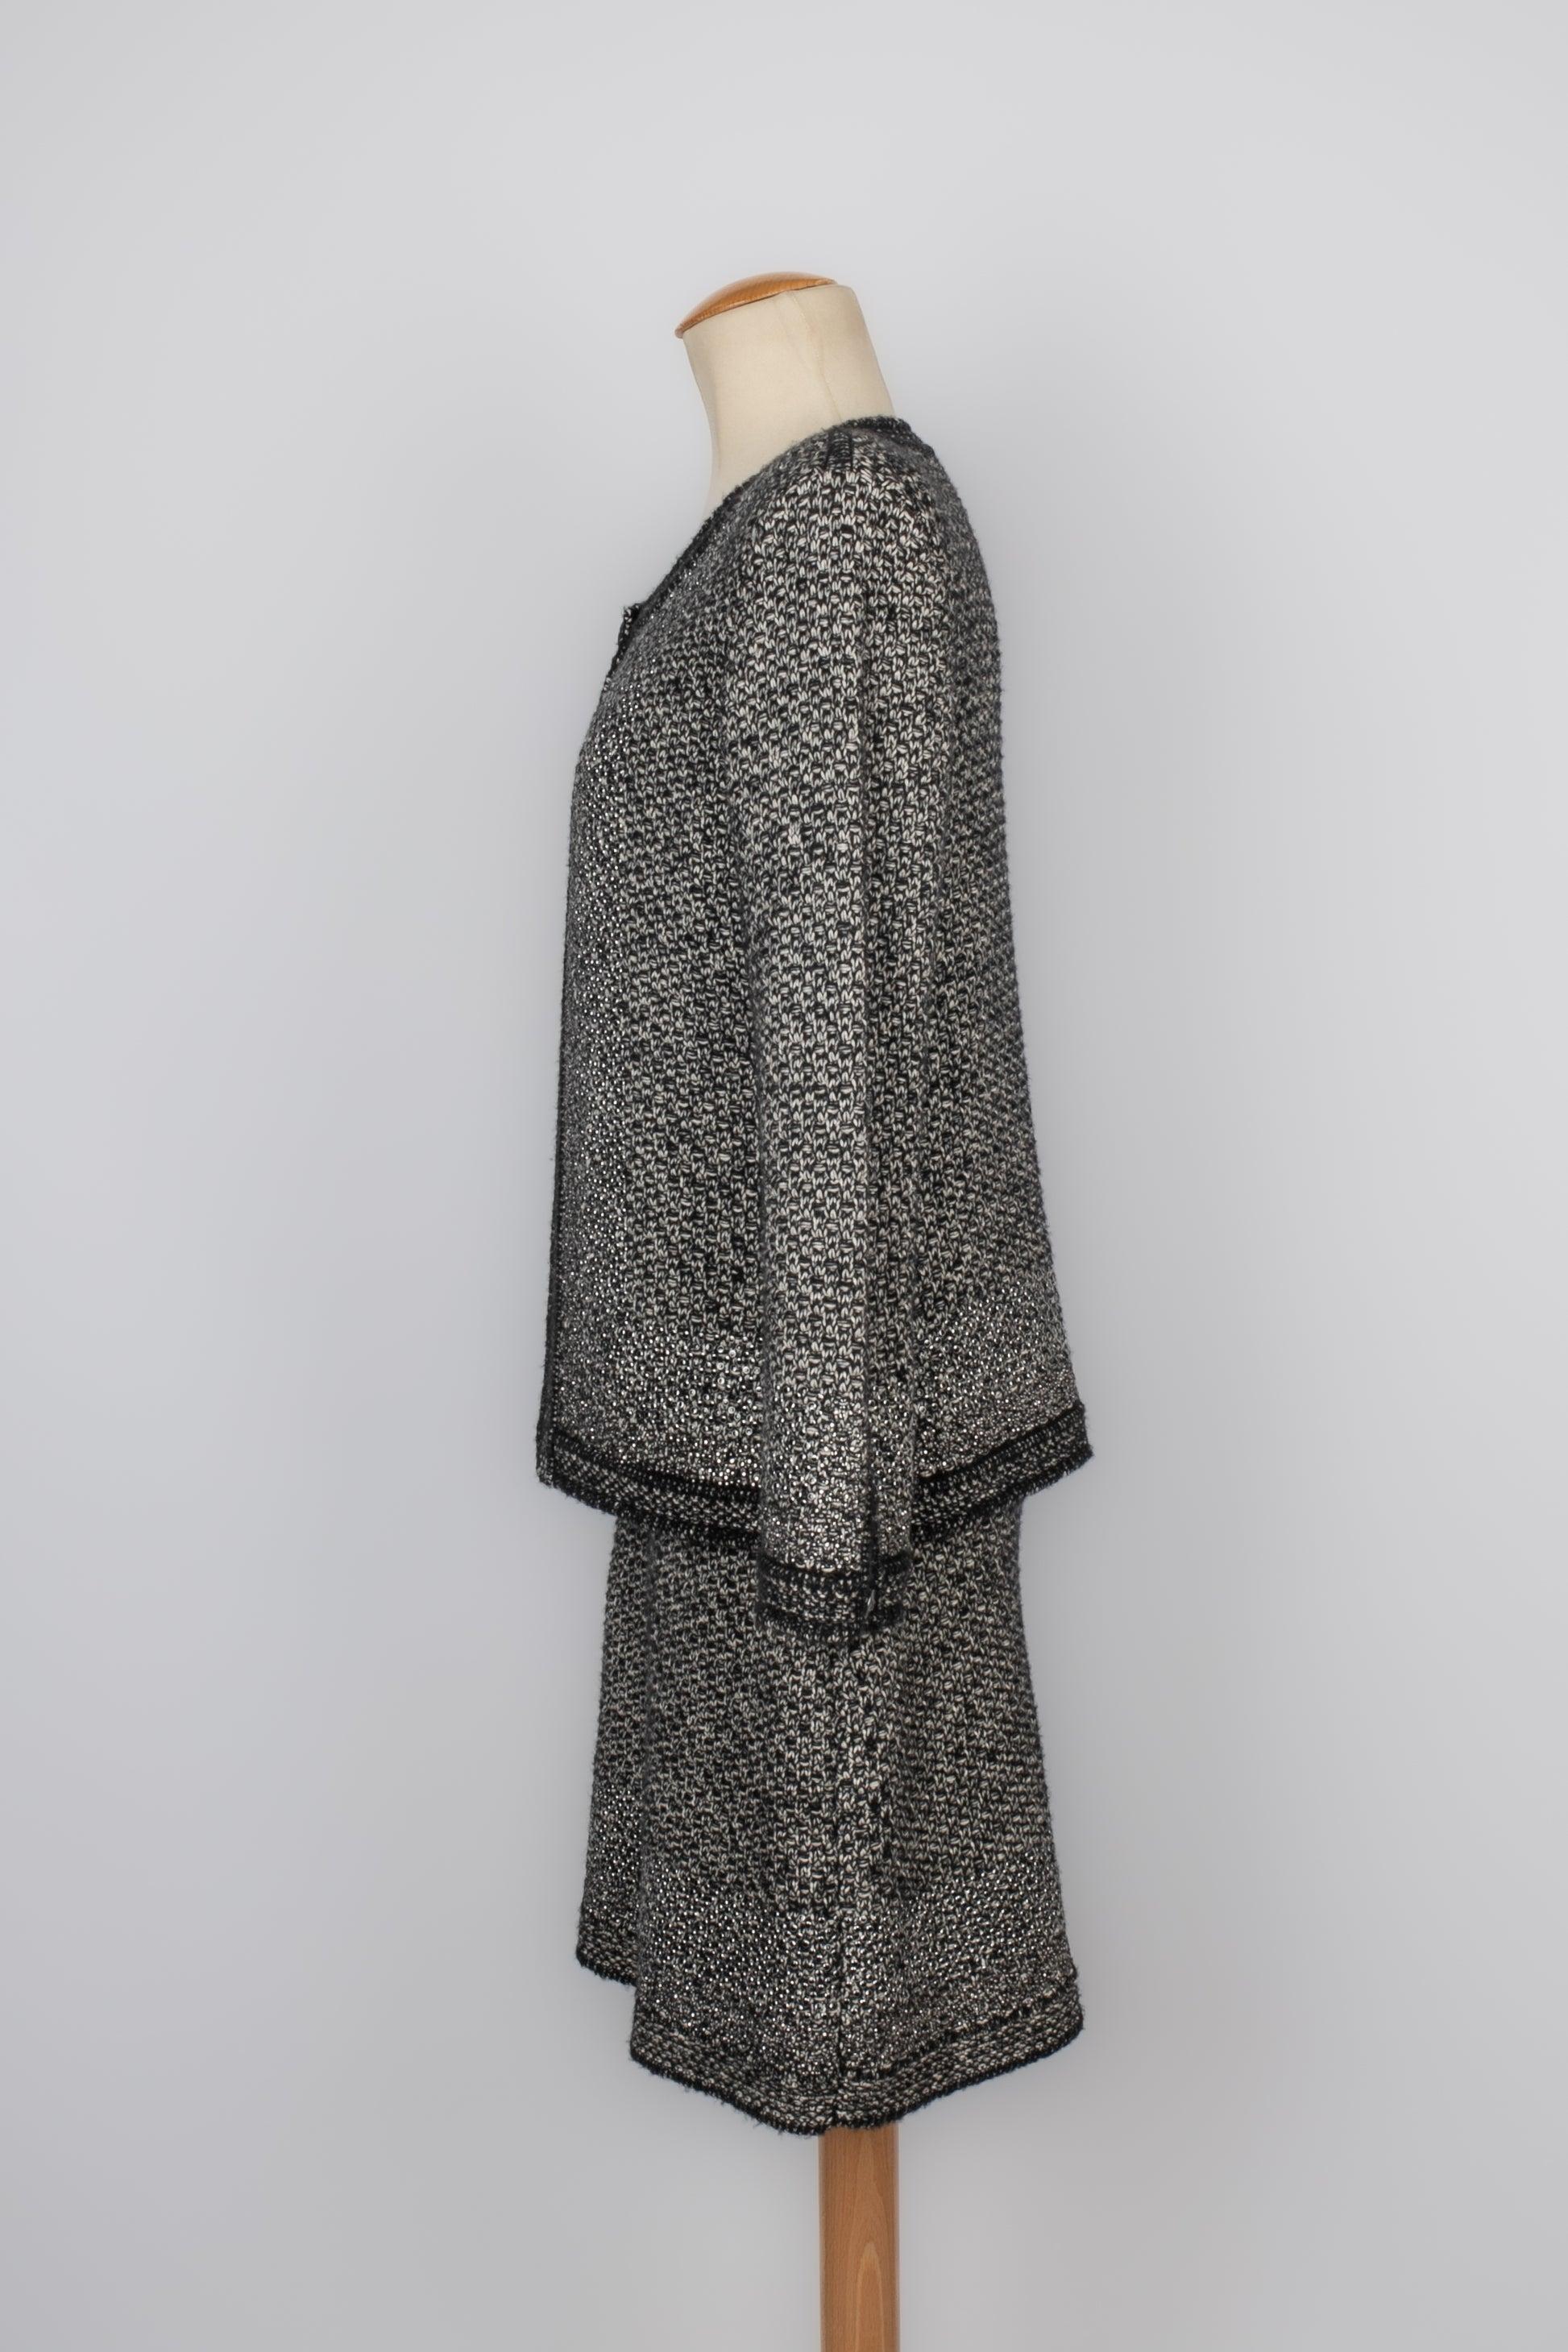 Chanel - (Made in France) Wool, silk, and cashmere set composed of a cardigan and a dress. 40FR size indicated.

Additional information:
Condition: Very good condition
Dimensions: Cardigan: Shoulder width: 40 cm - Chest: 52 cm - Sleeve length: 59 cm